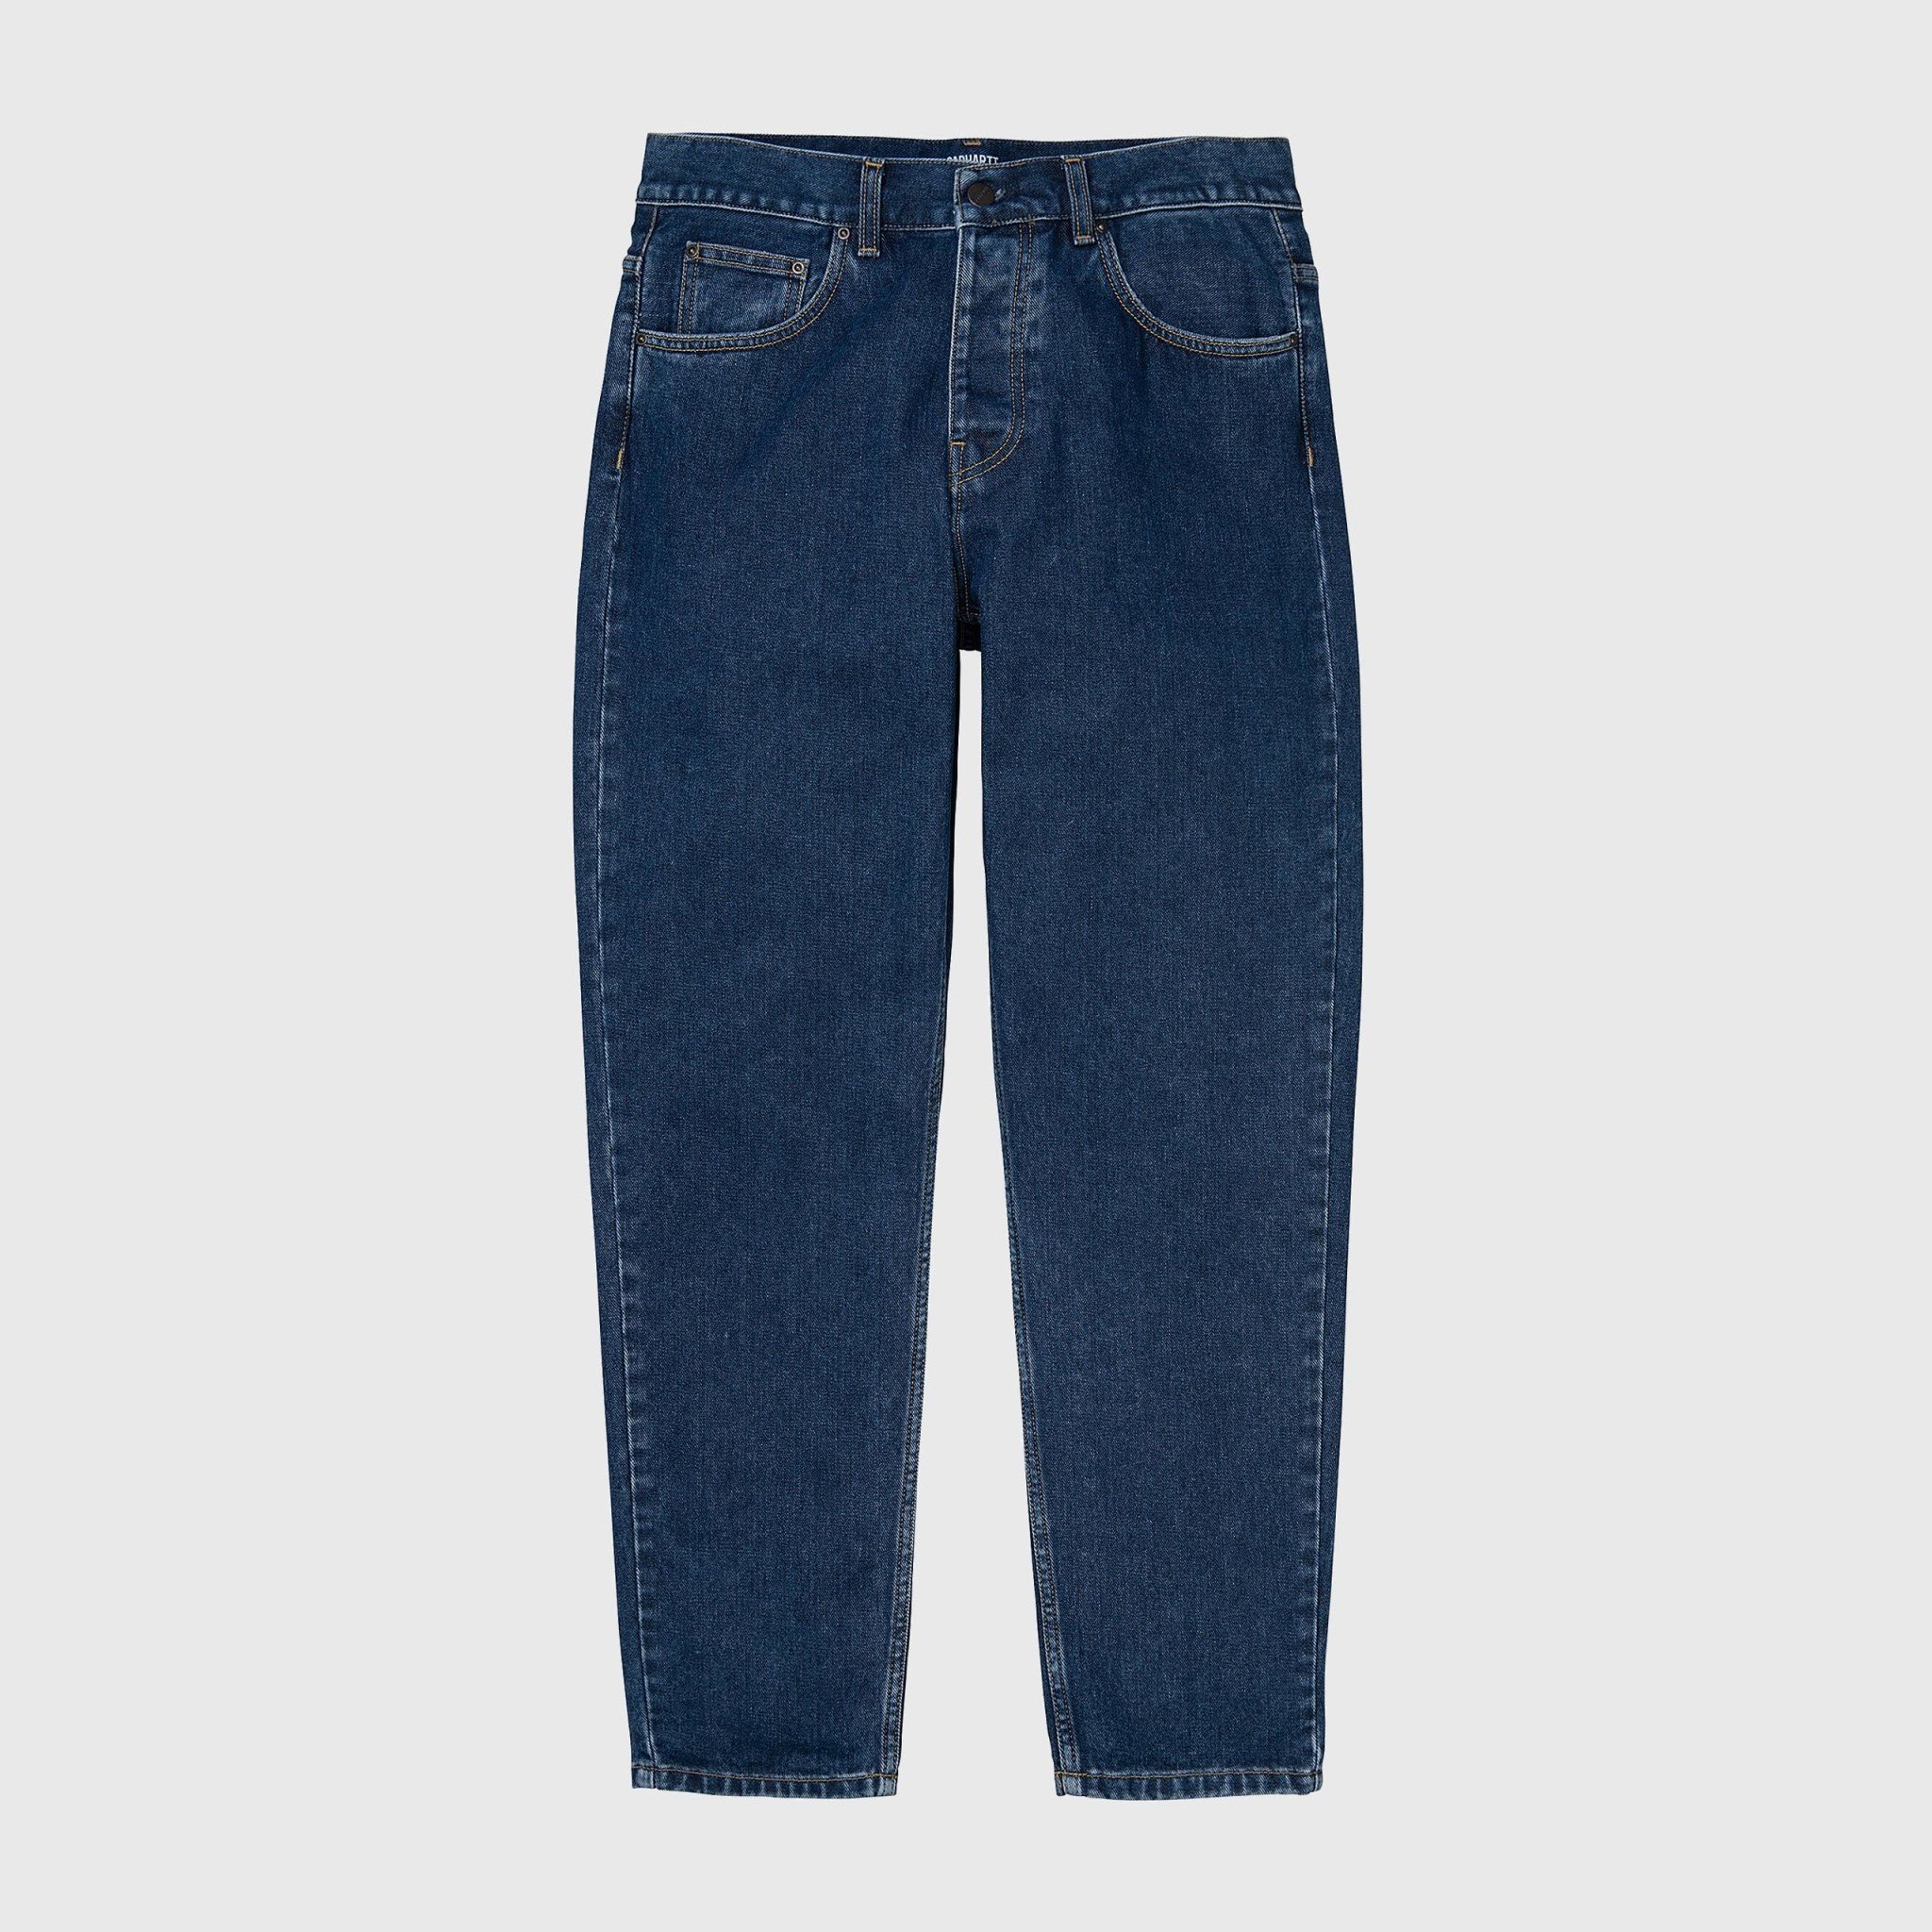 Carhartt WIP Newell Pant Blue Stone Washed Jeans - DIV. Amsterdam